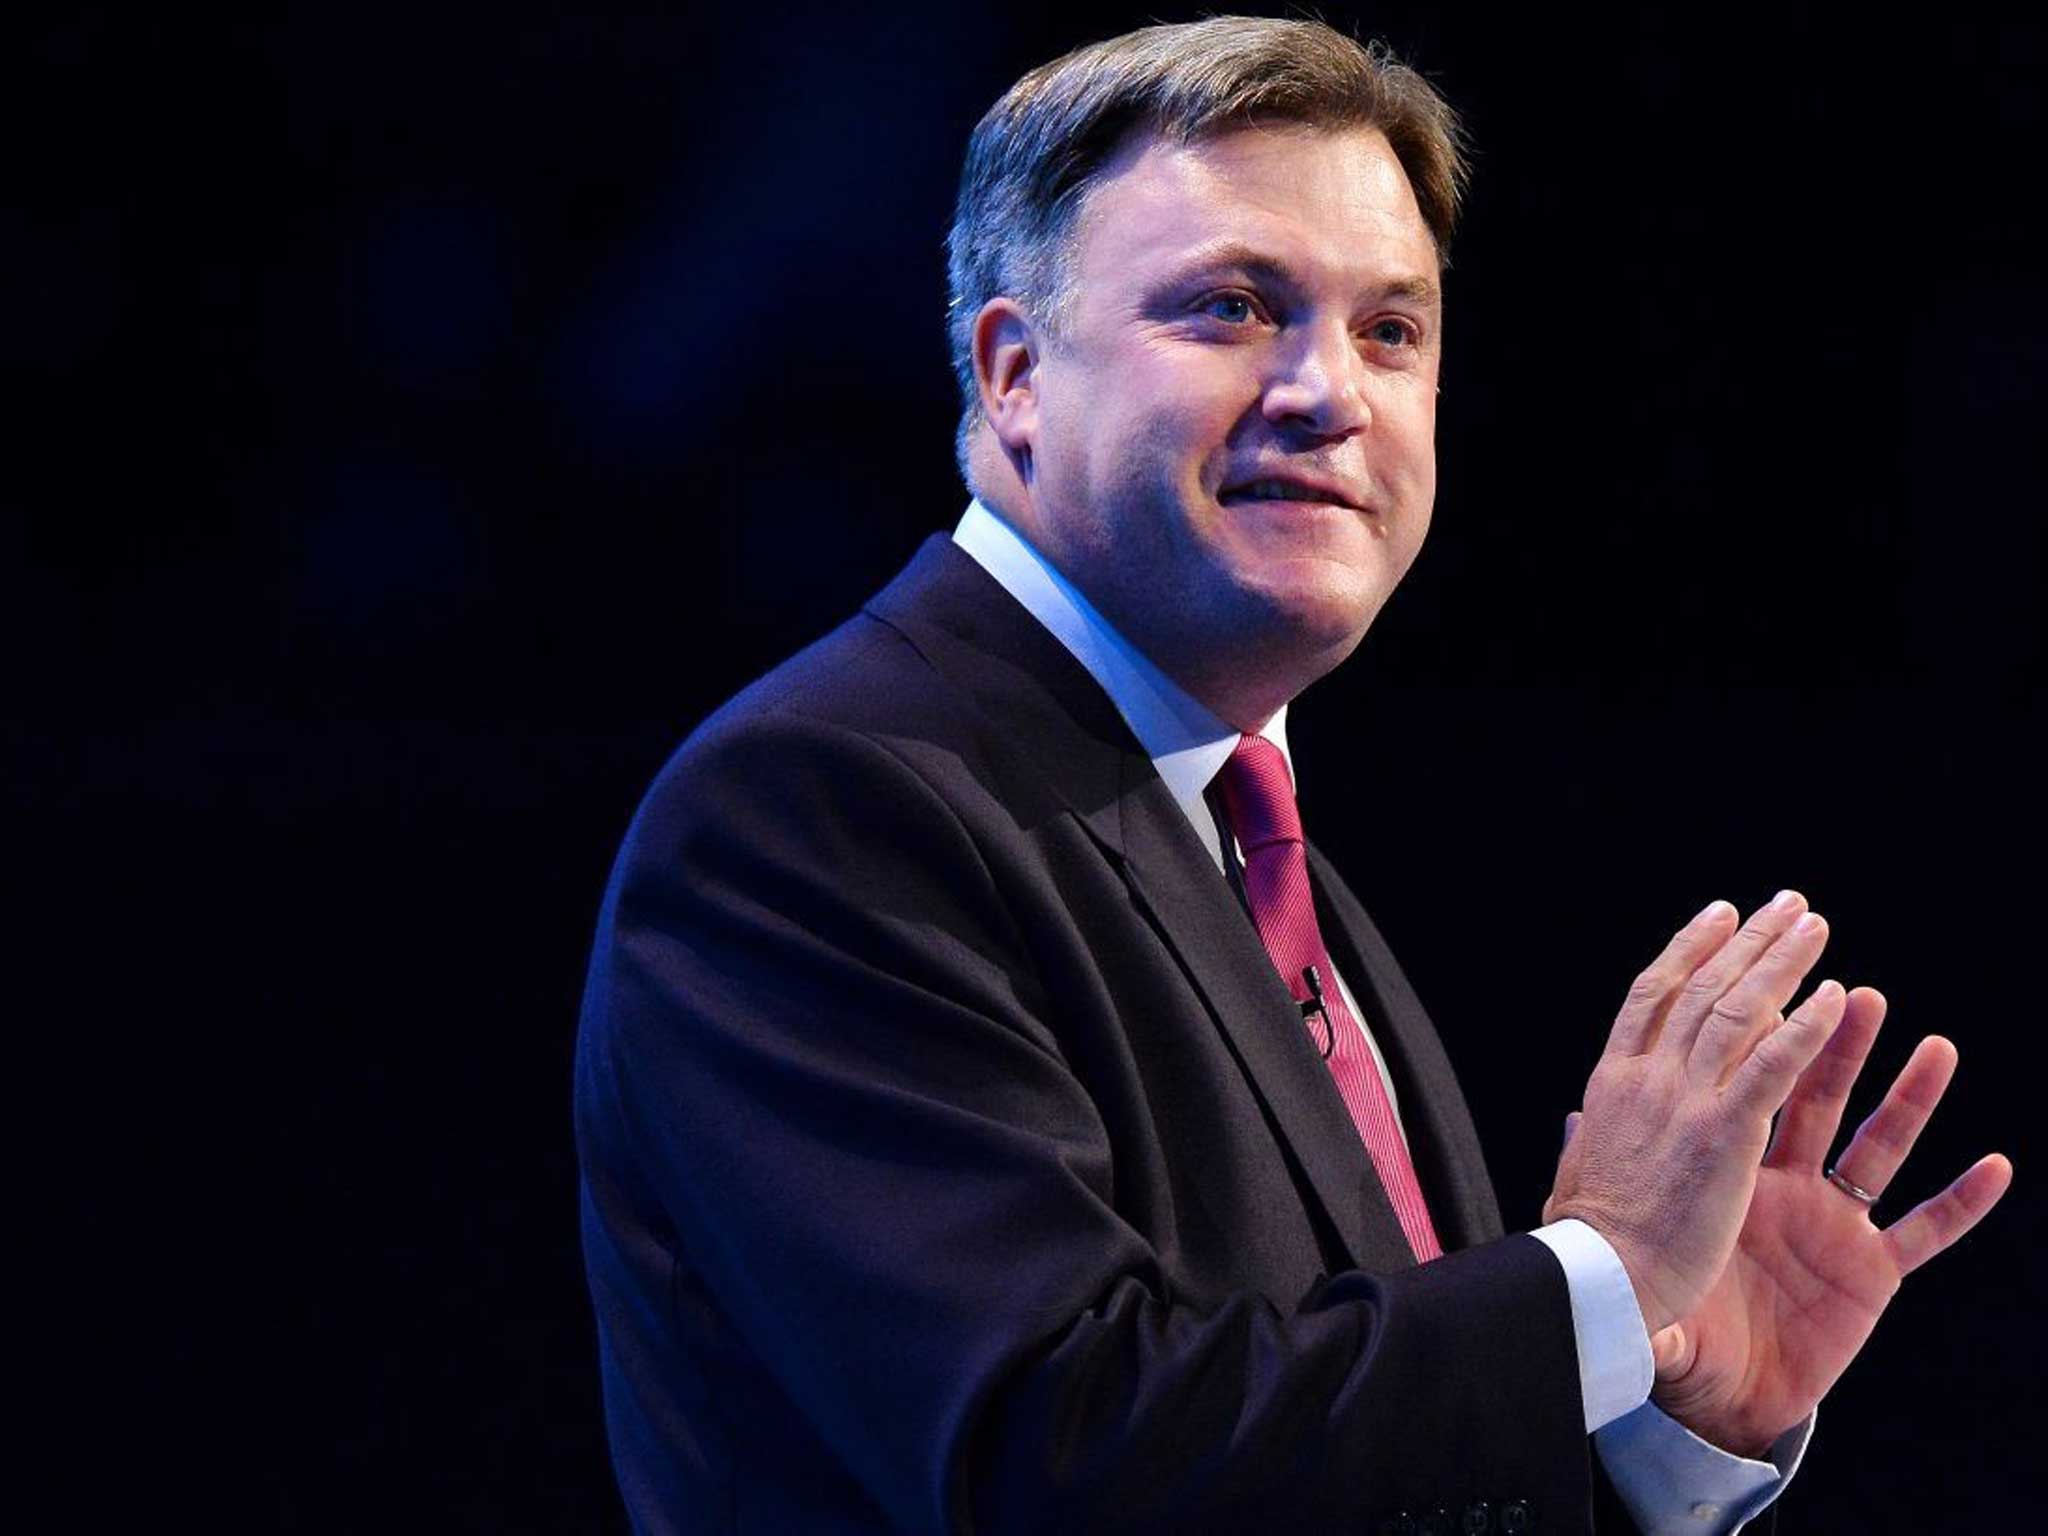 Ed Balls has 'categorically' declared he has never taken cocaine